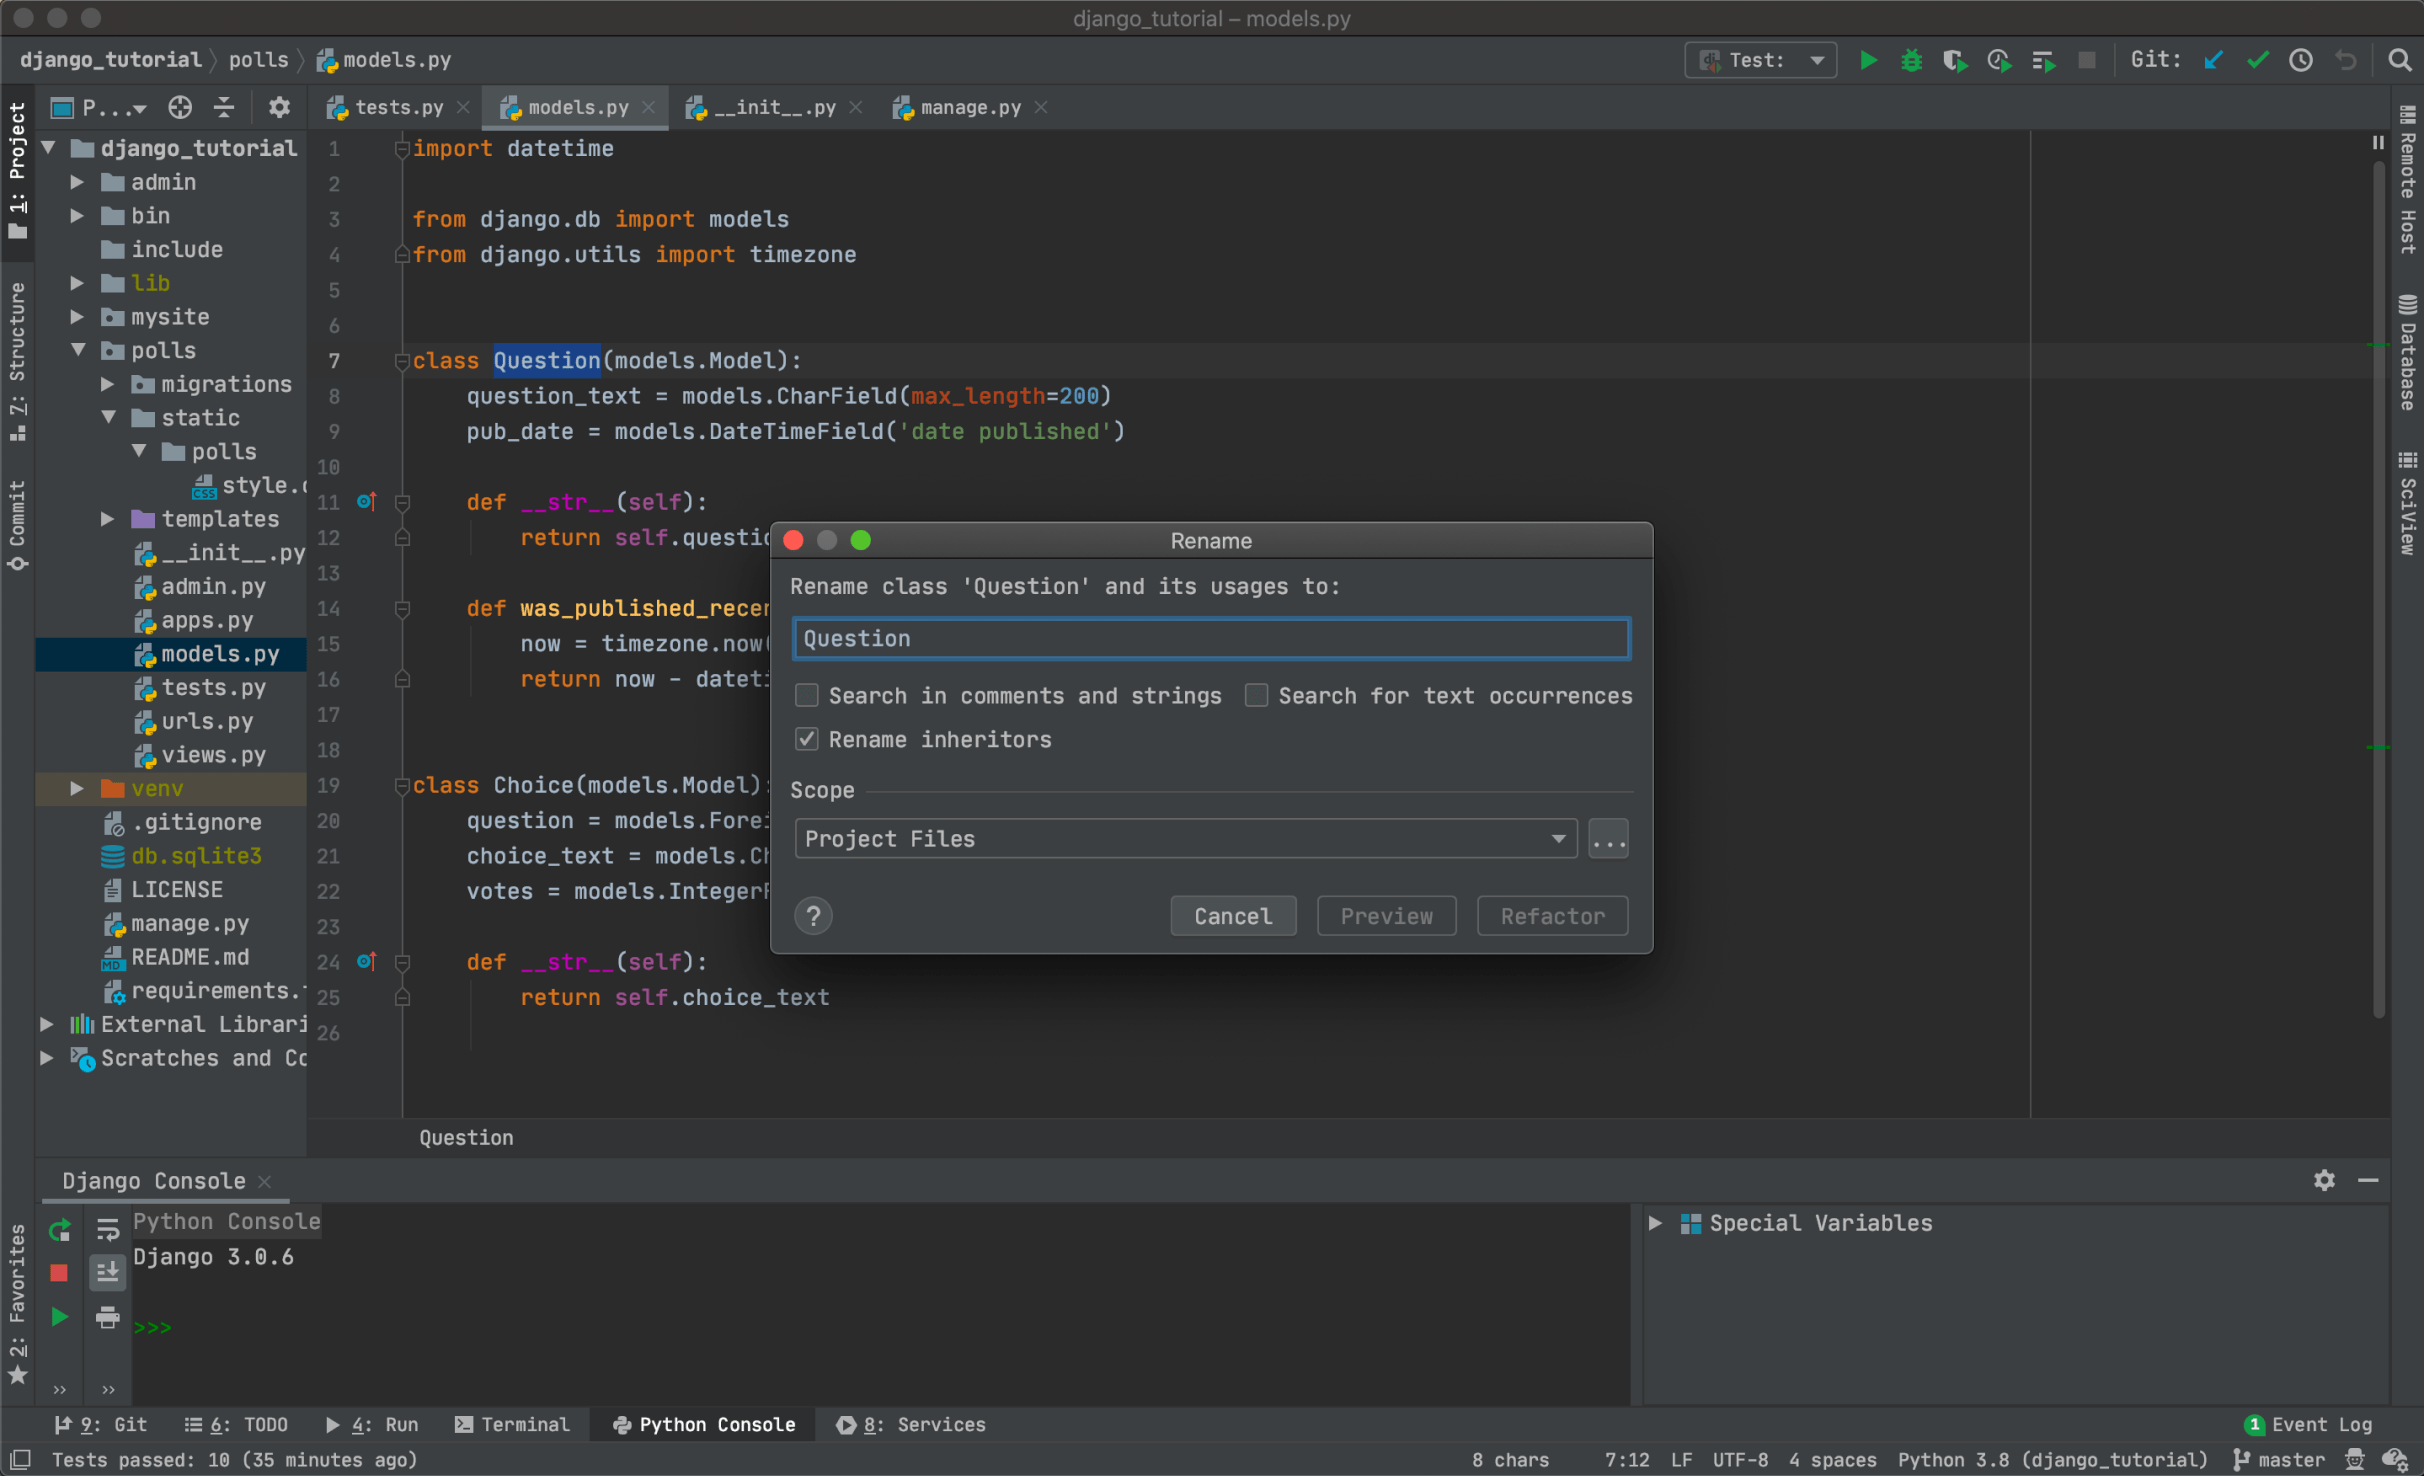 PyCharm: the Python IDE for Professional Developers by JetBrains | JetBrains:  Developer Tools for Professionals and Teams